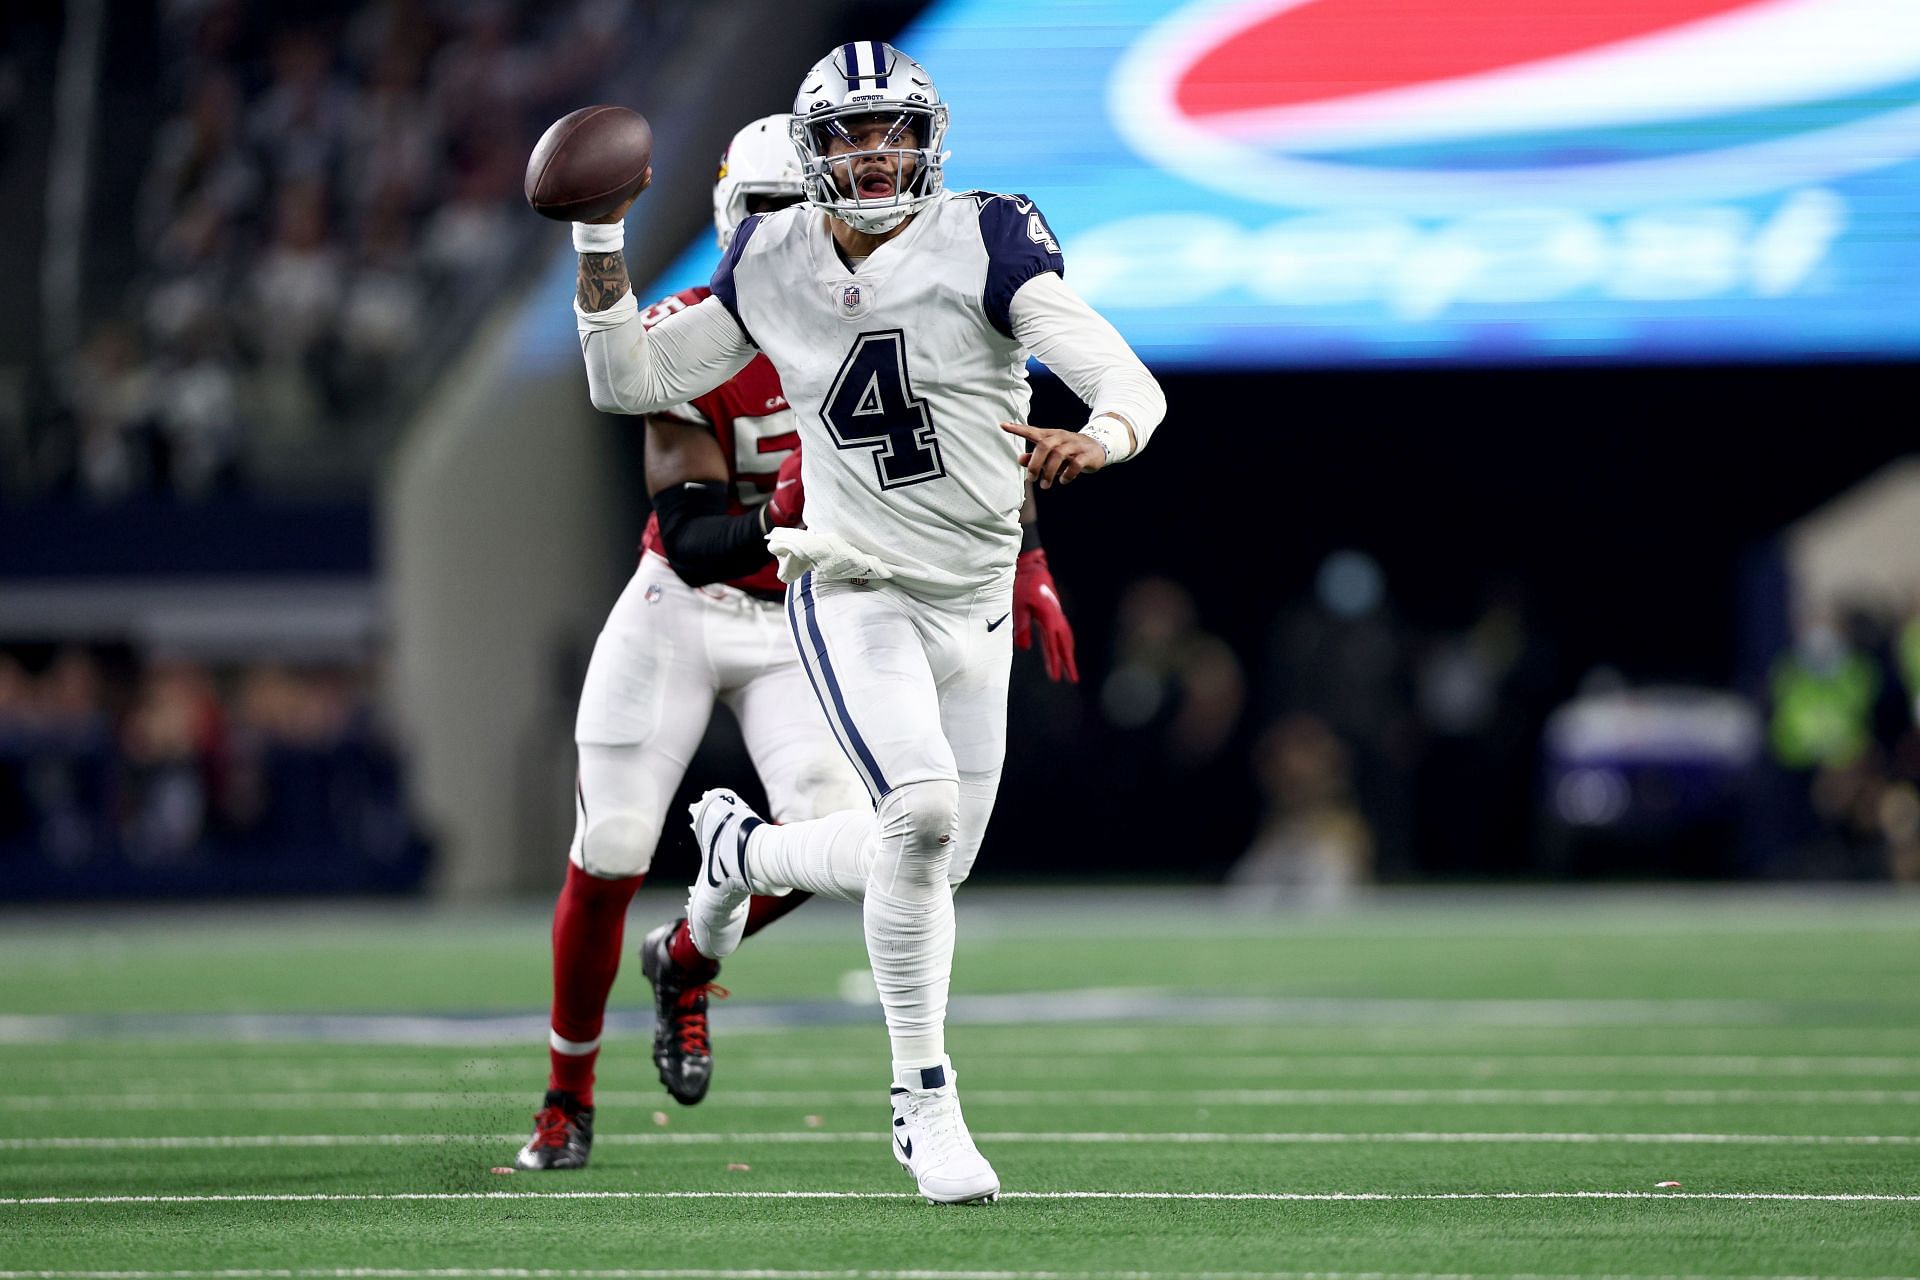 Dak Prescott and the Dallas Cowboys were the highest ranked offense in 2021